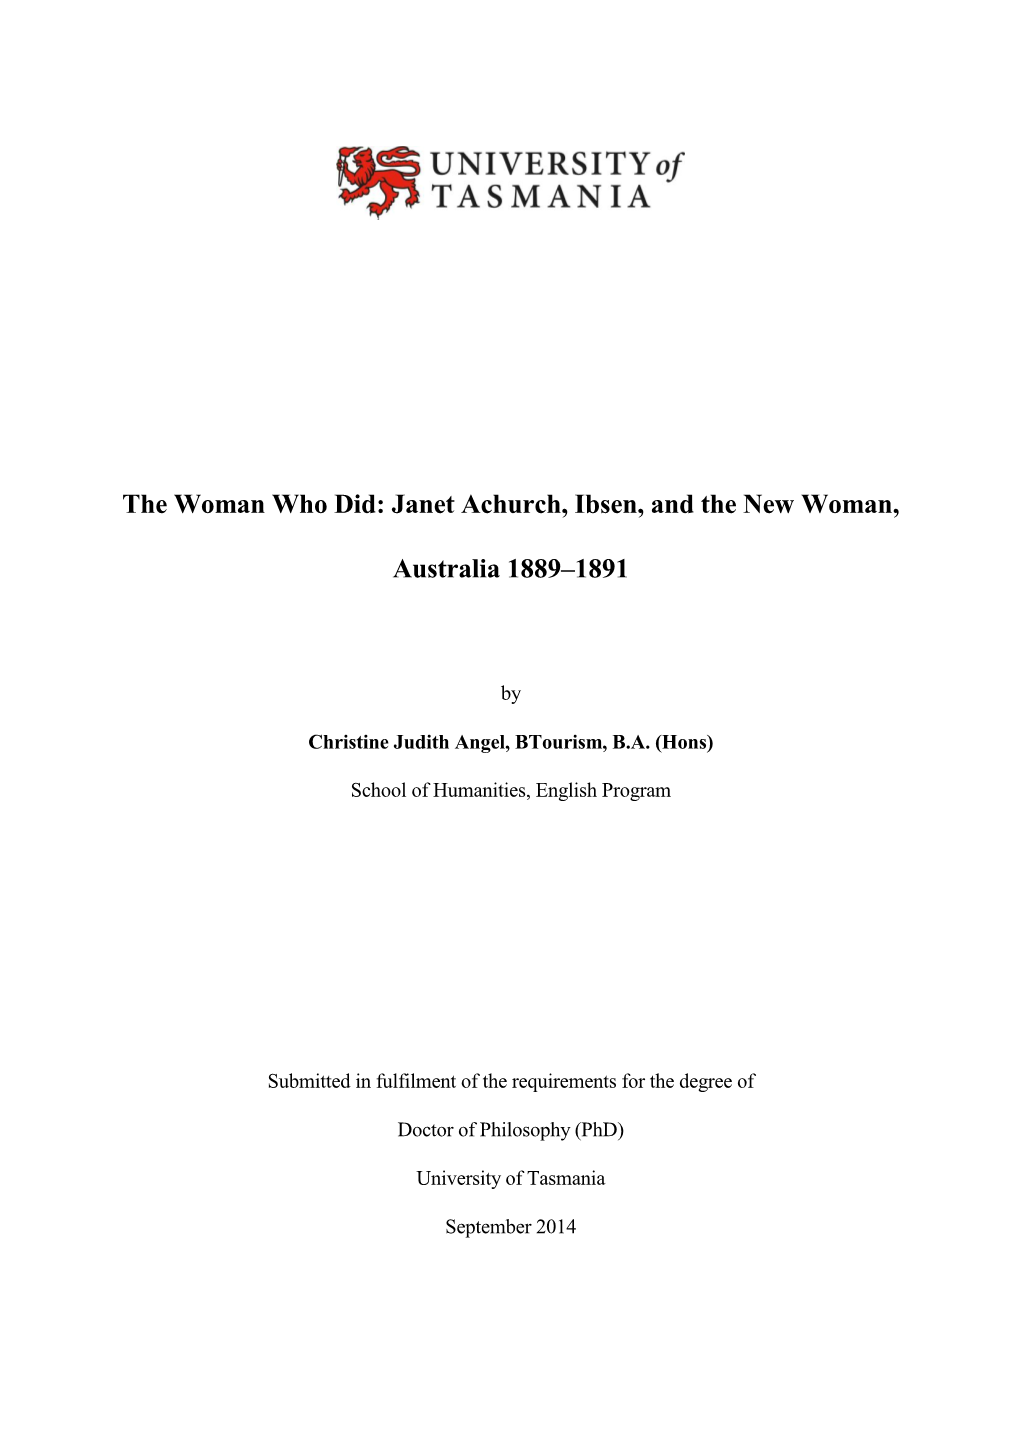 Janet Achurch, Ibsen, and the New Woman, Australia